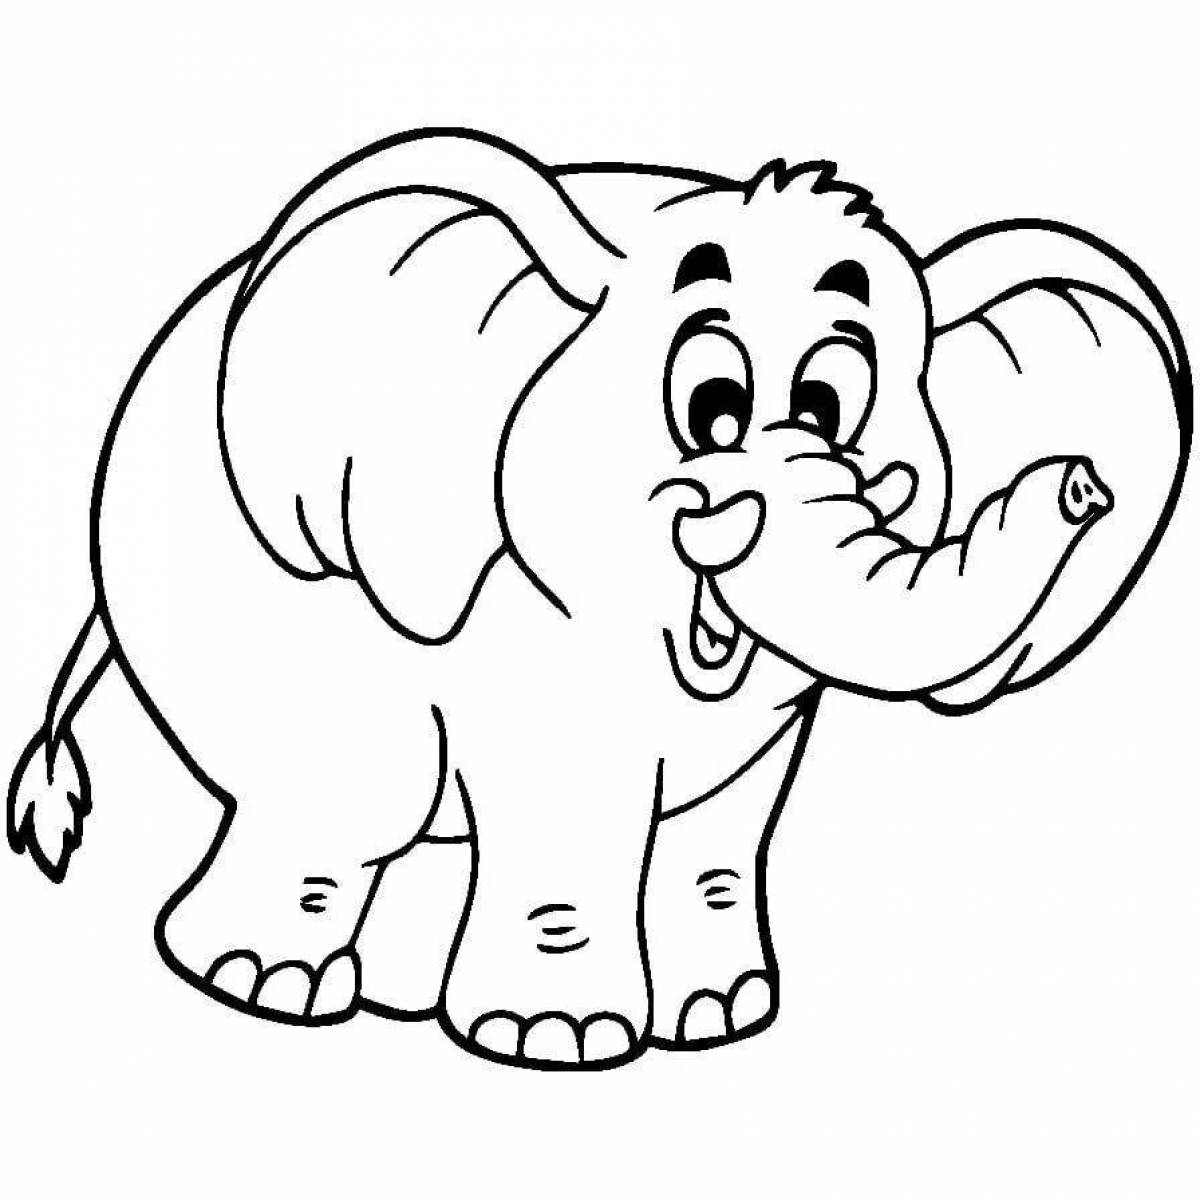 Cute elephant coloring book for kids